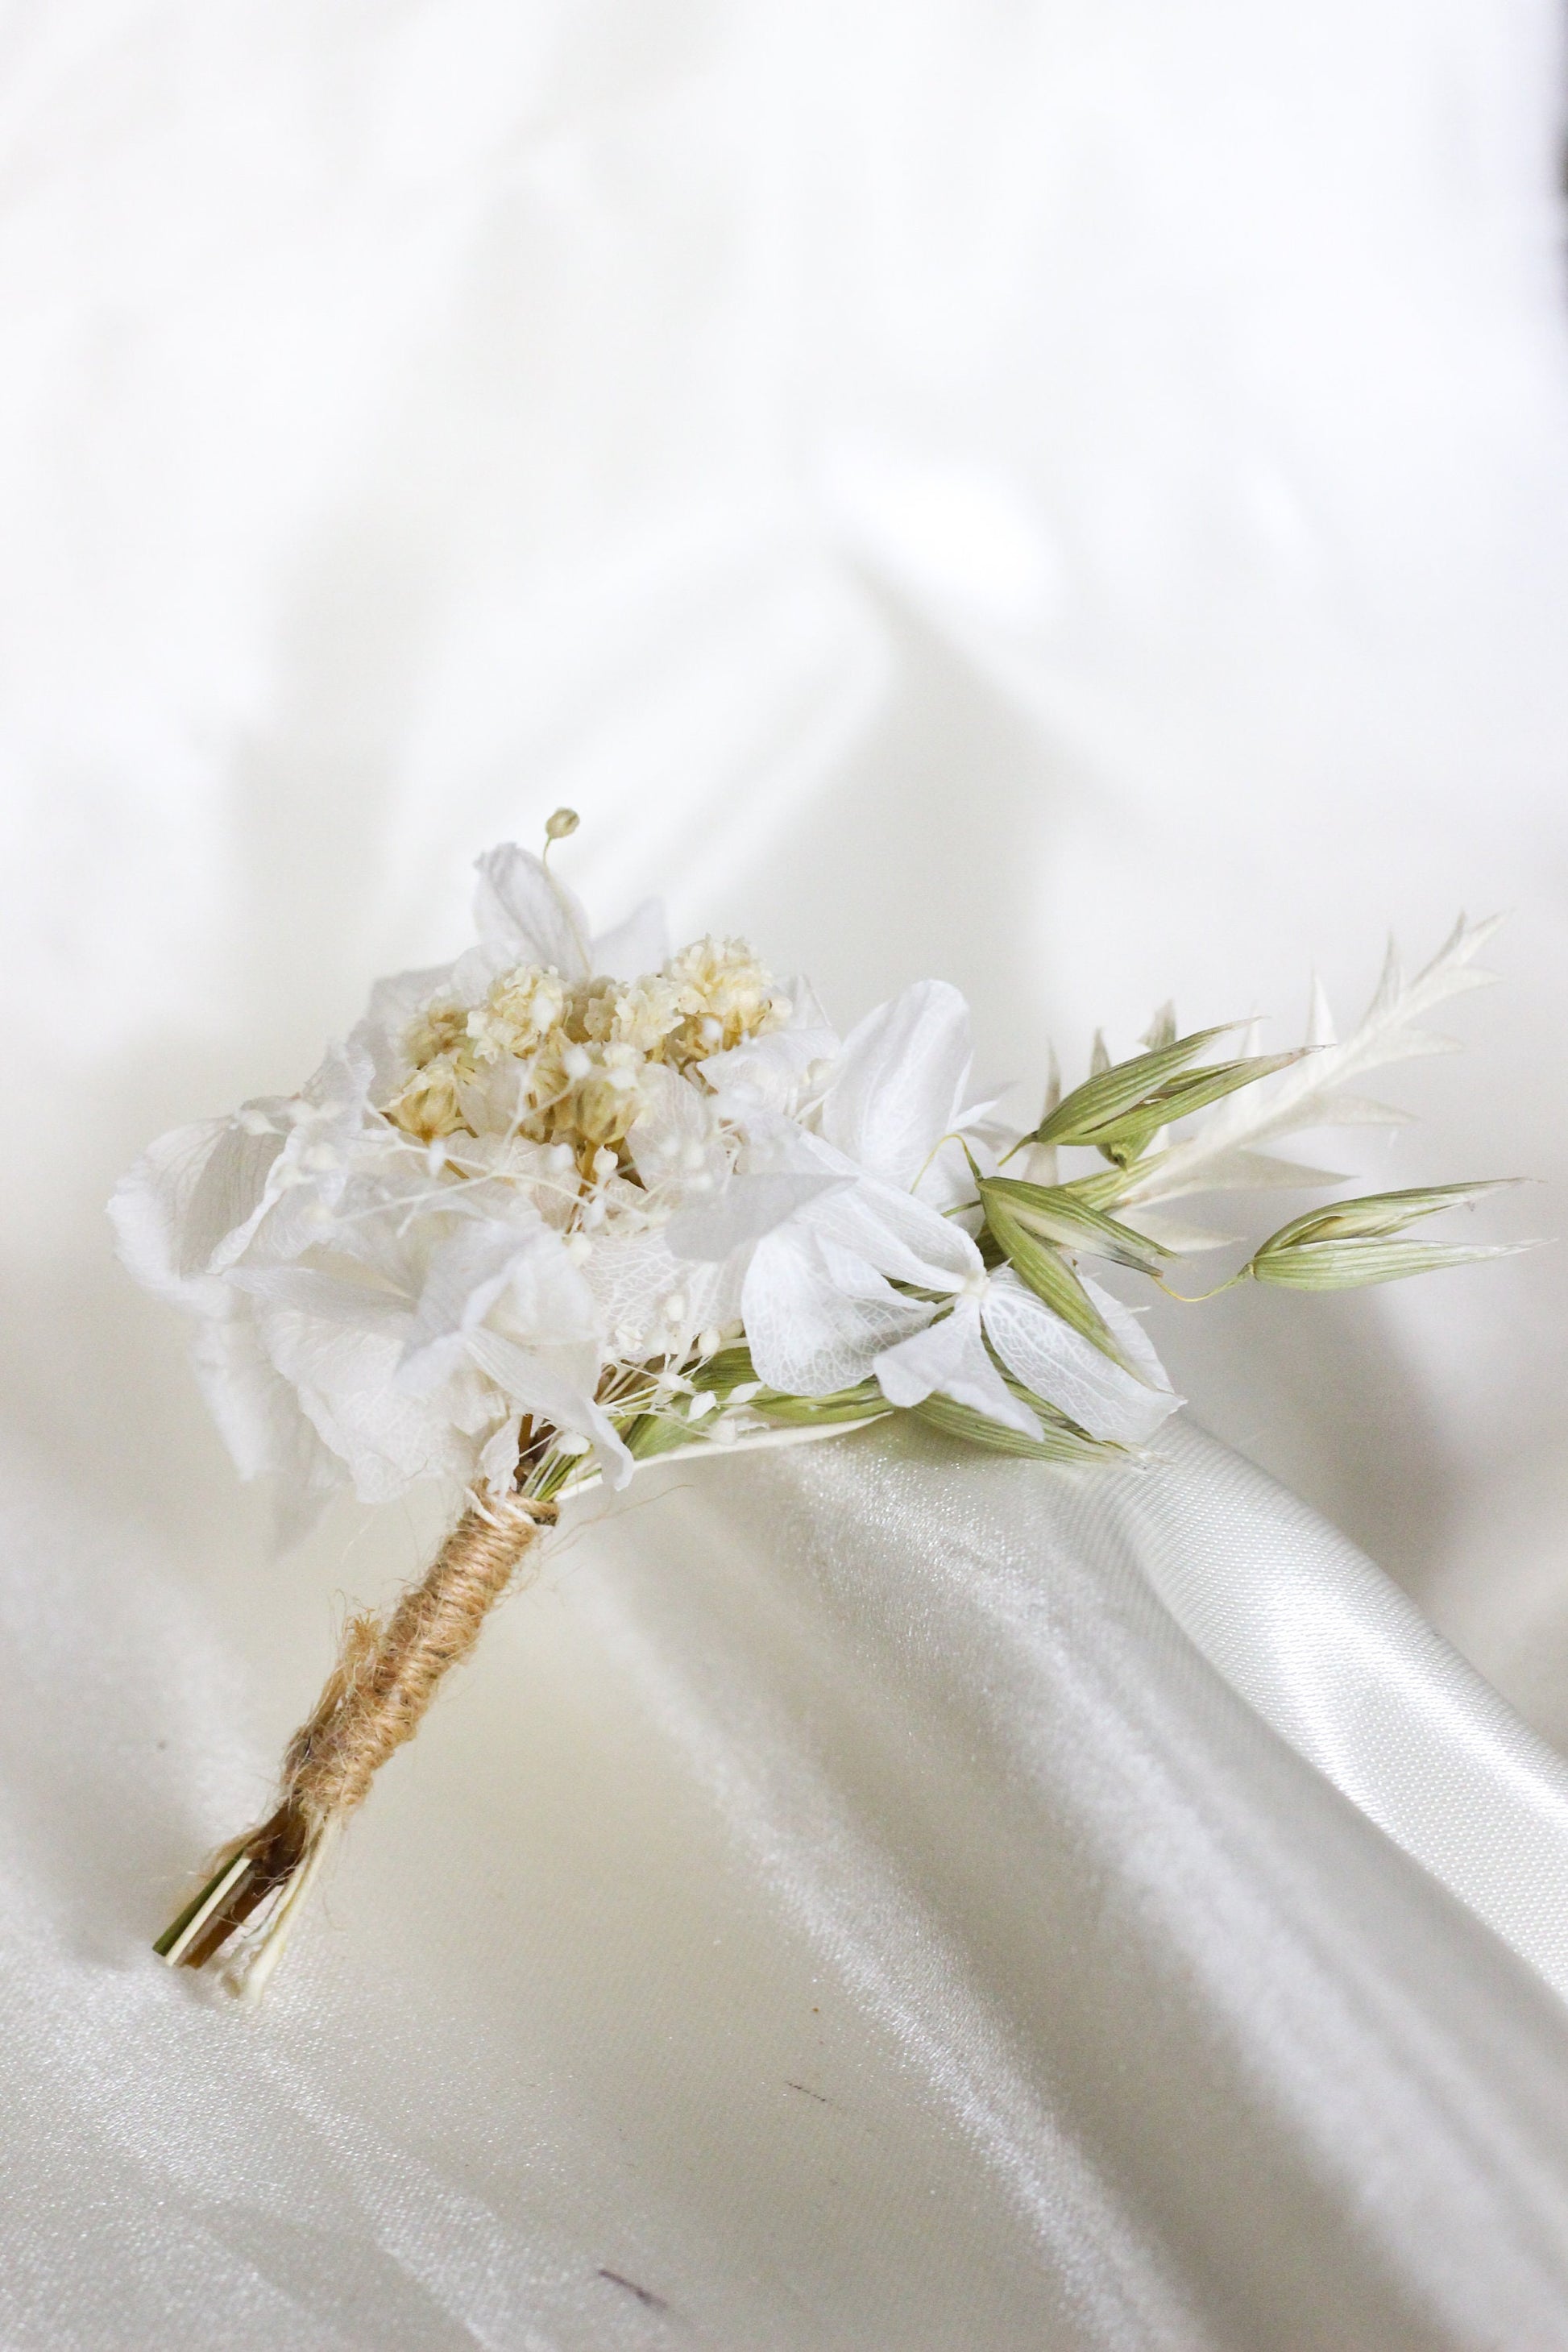 AVA wedding boutonniere/ buttonhole for bride and groom